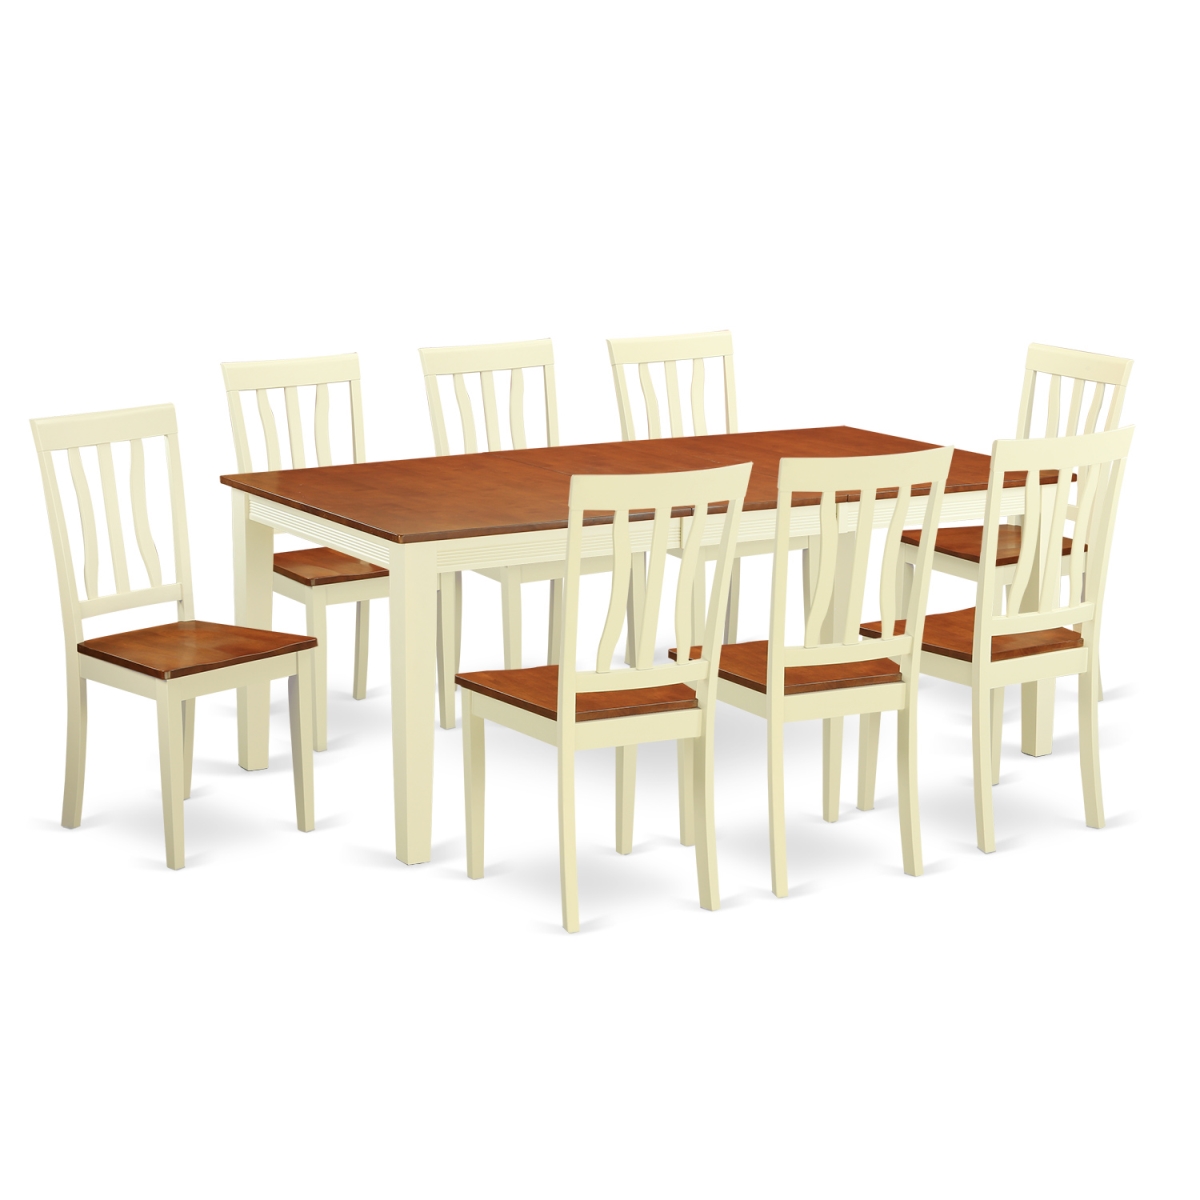 QUAN9-WHI-W Kitchen Nook Dining Set - Dining Room Table & 8 Chairs, Buttermilk & Cherry - 9 Piece -  East West Furniture